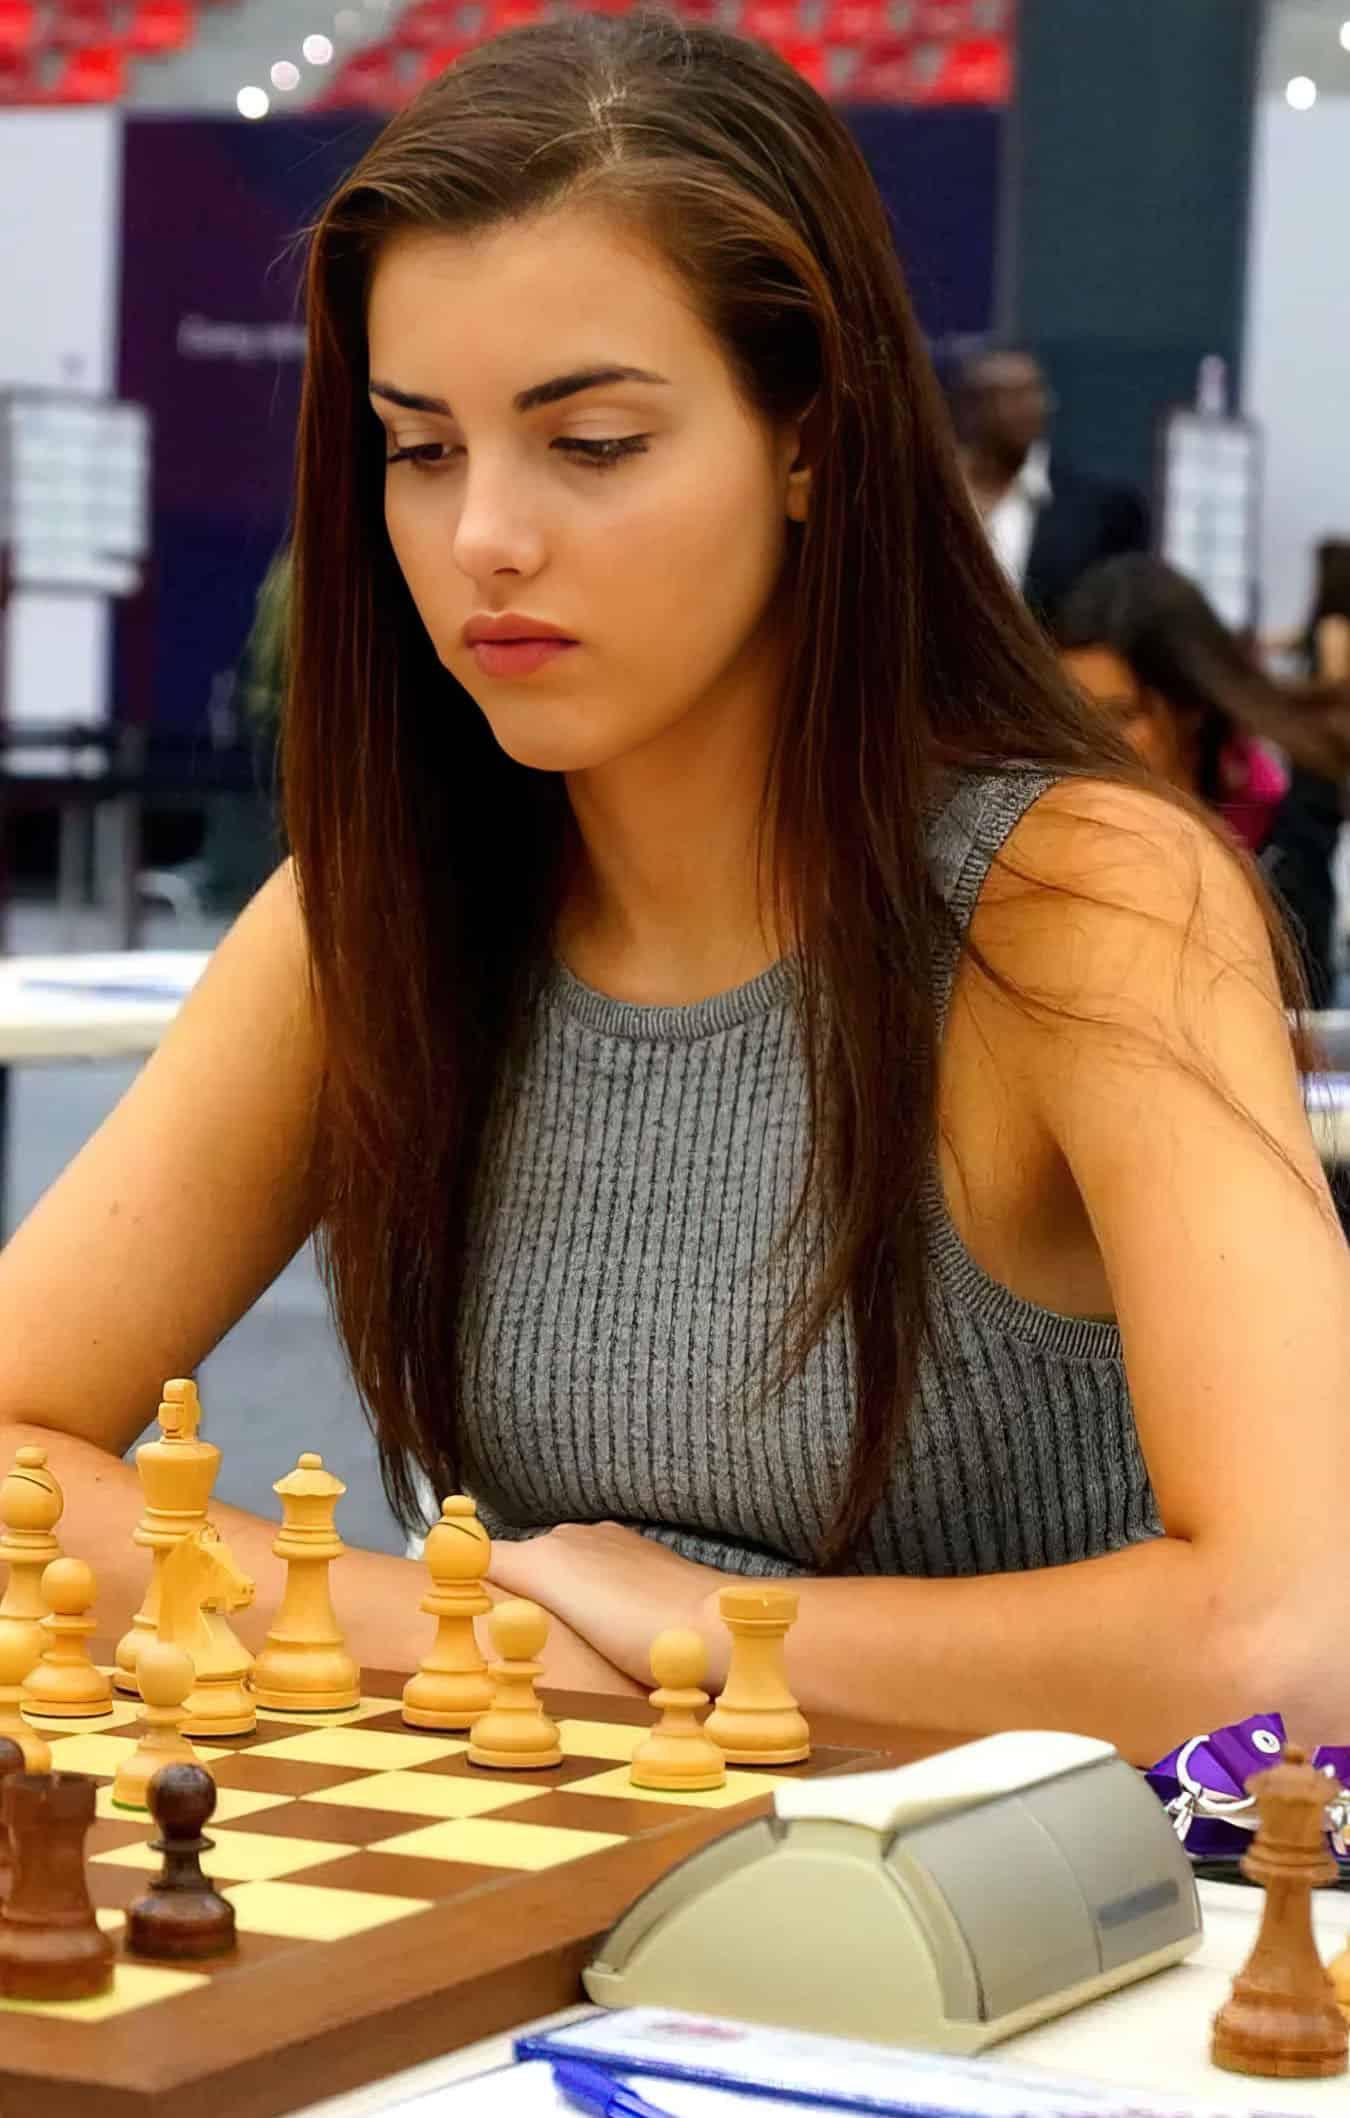 andrea botez playing chess